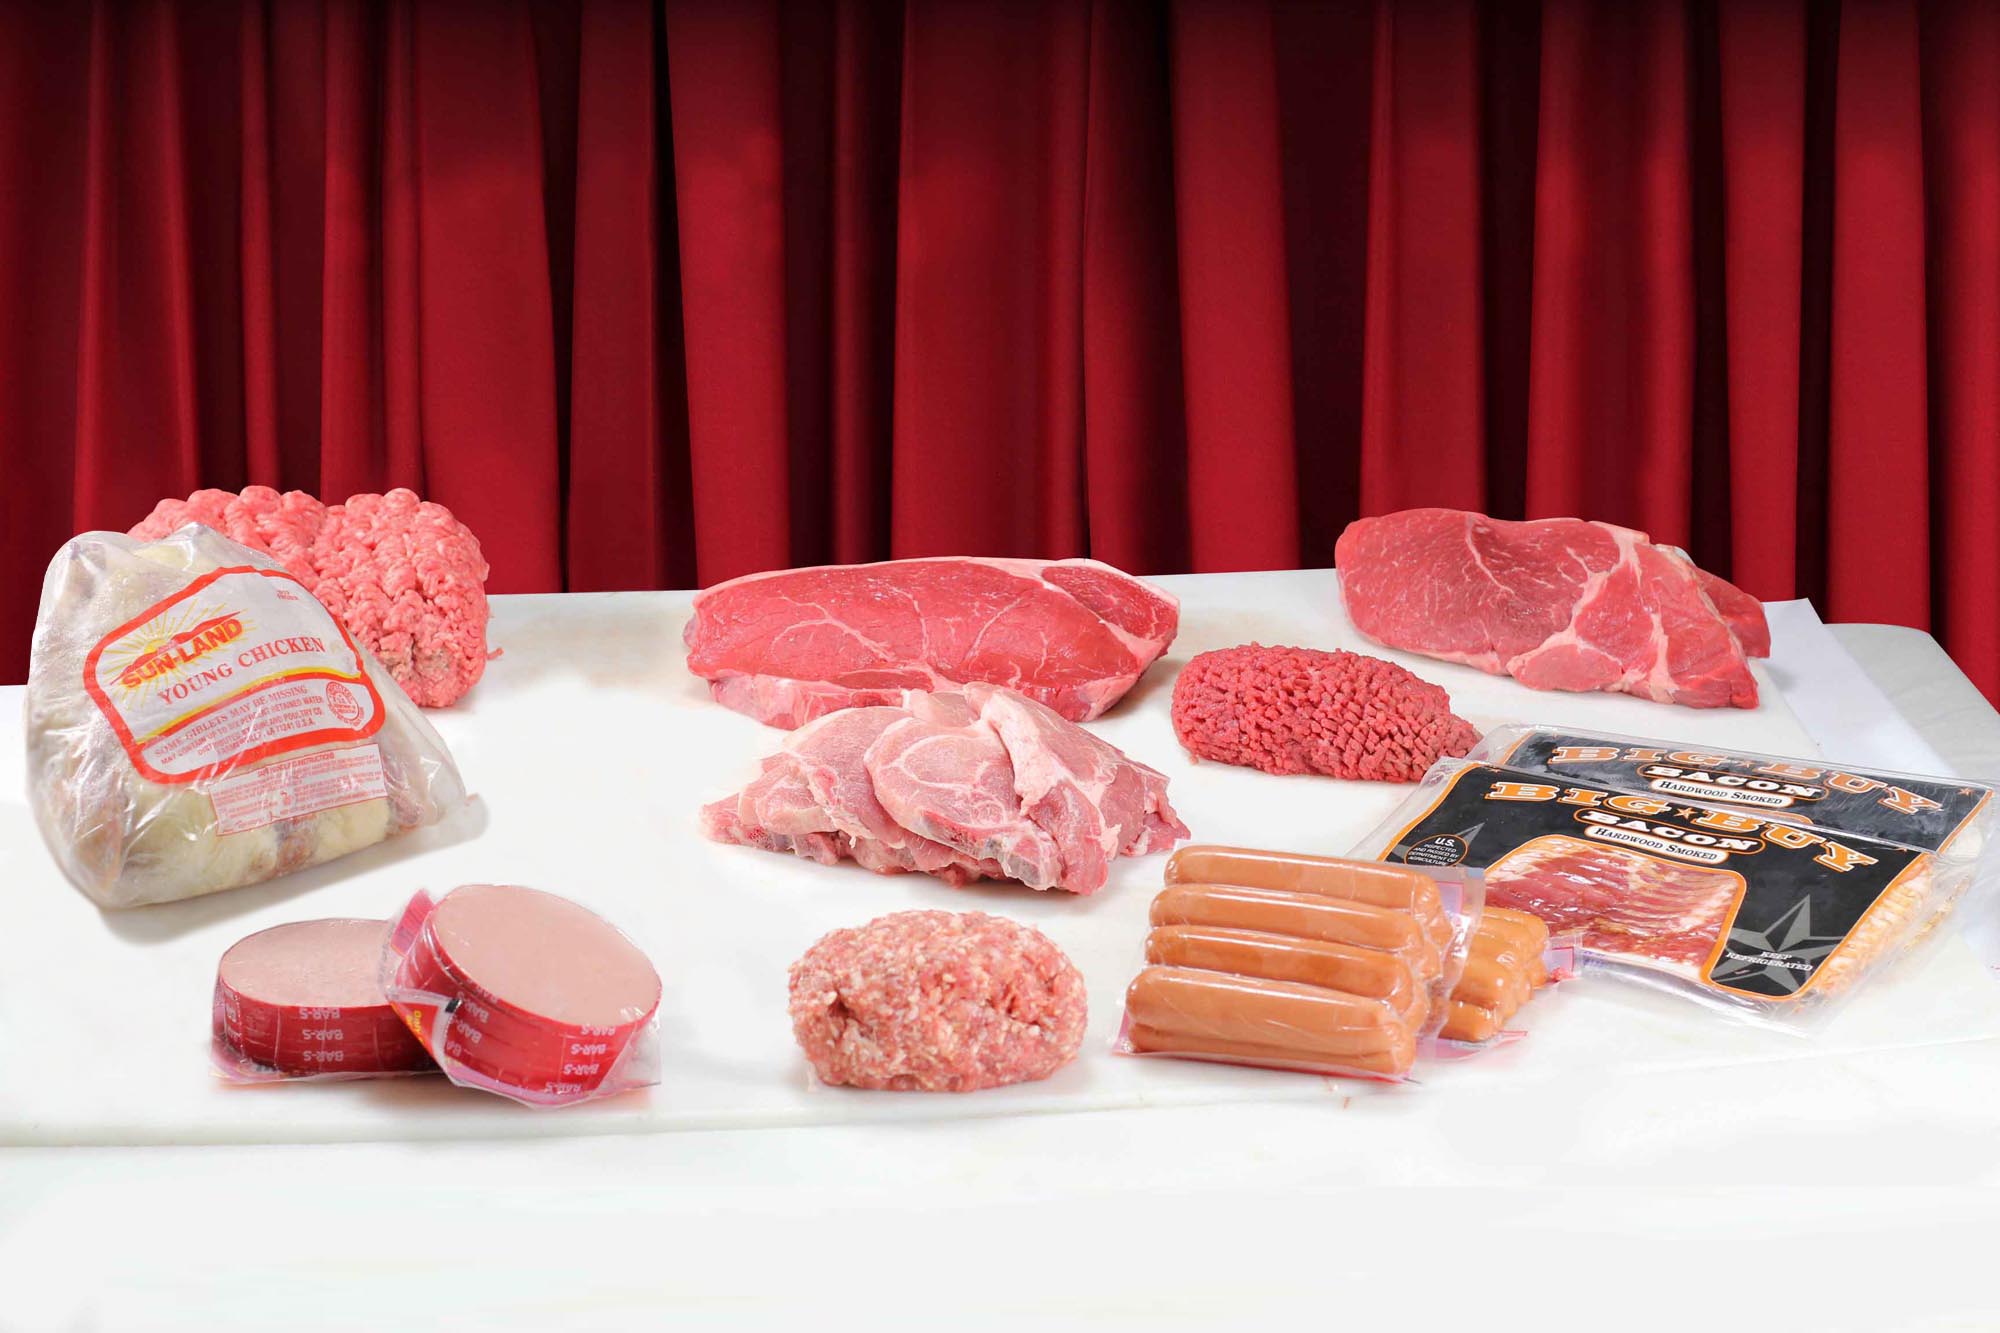 This image icon displays the Purdy's Quality Meats Thrifty Pack image